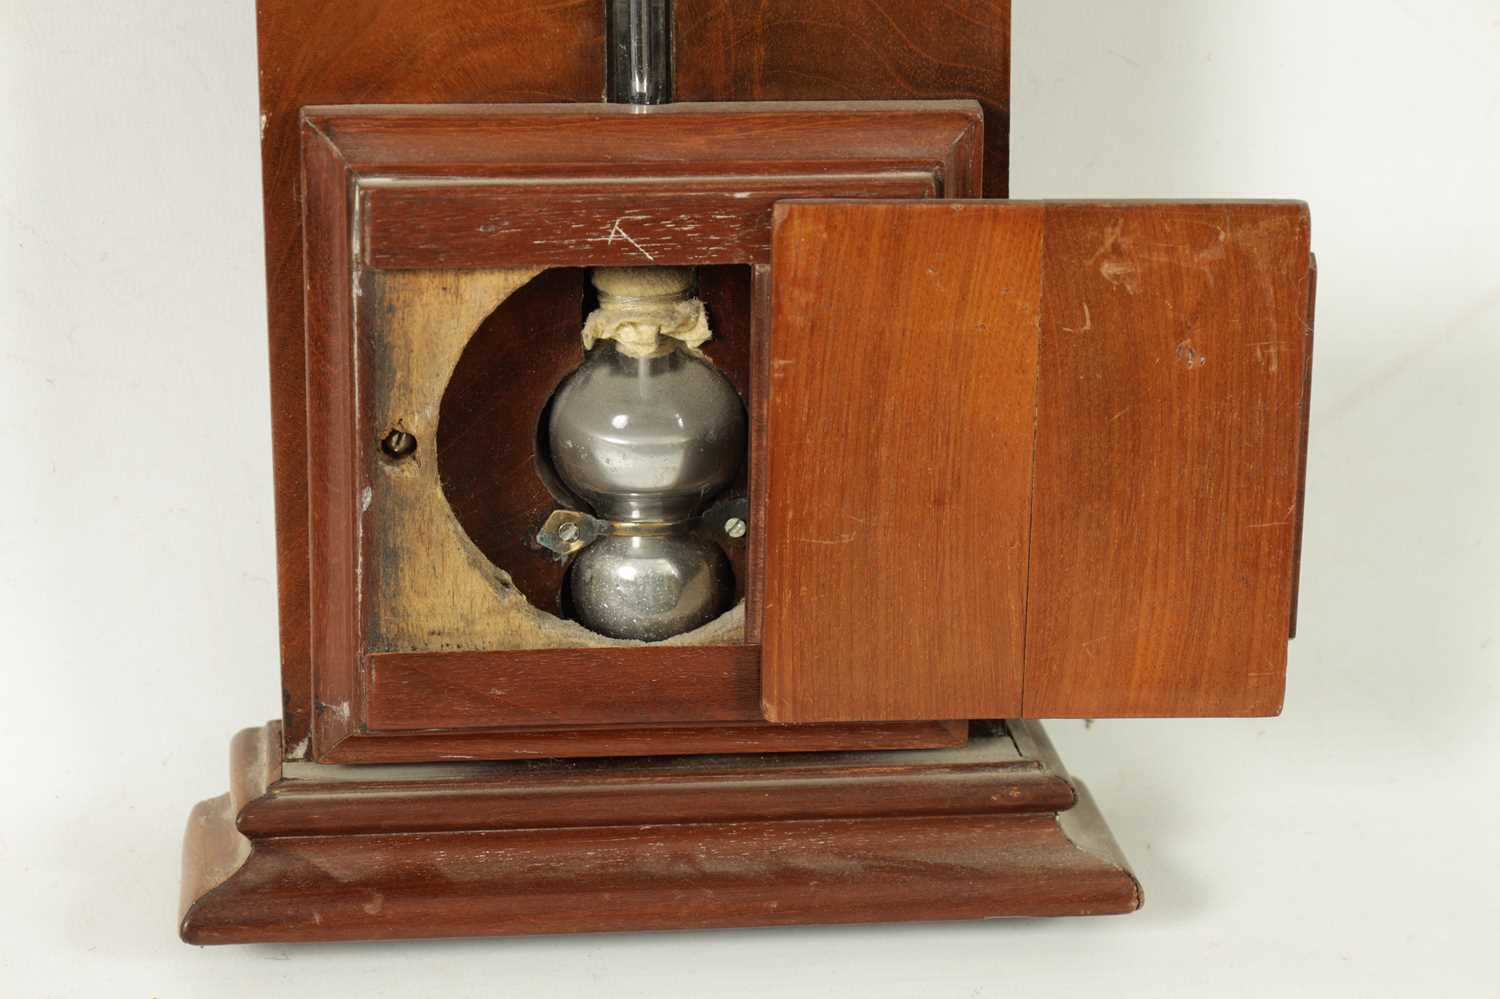 A 19TH CENTURY FRENCH MAHOGANY STICK BAROMETER - Image 5 of 6